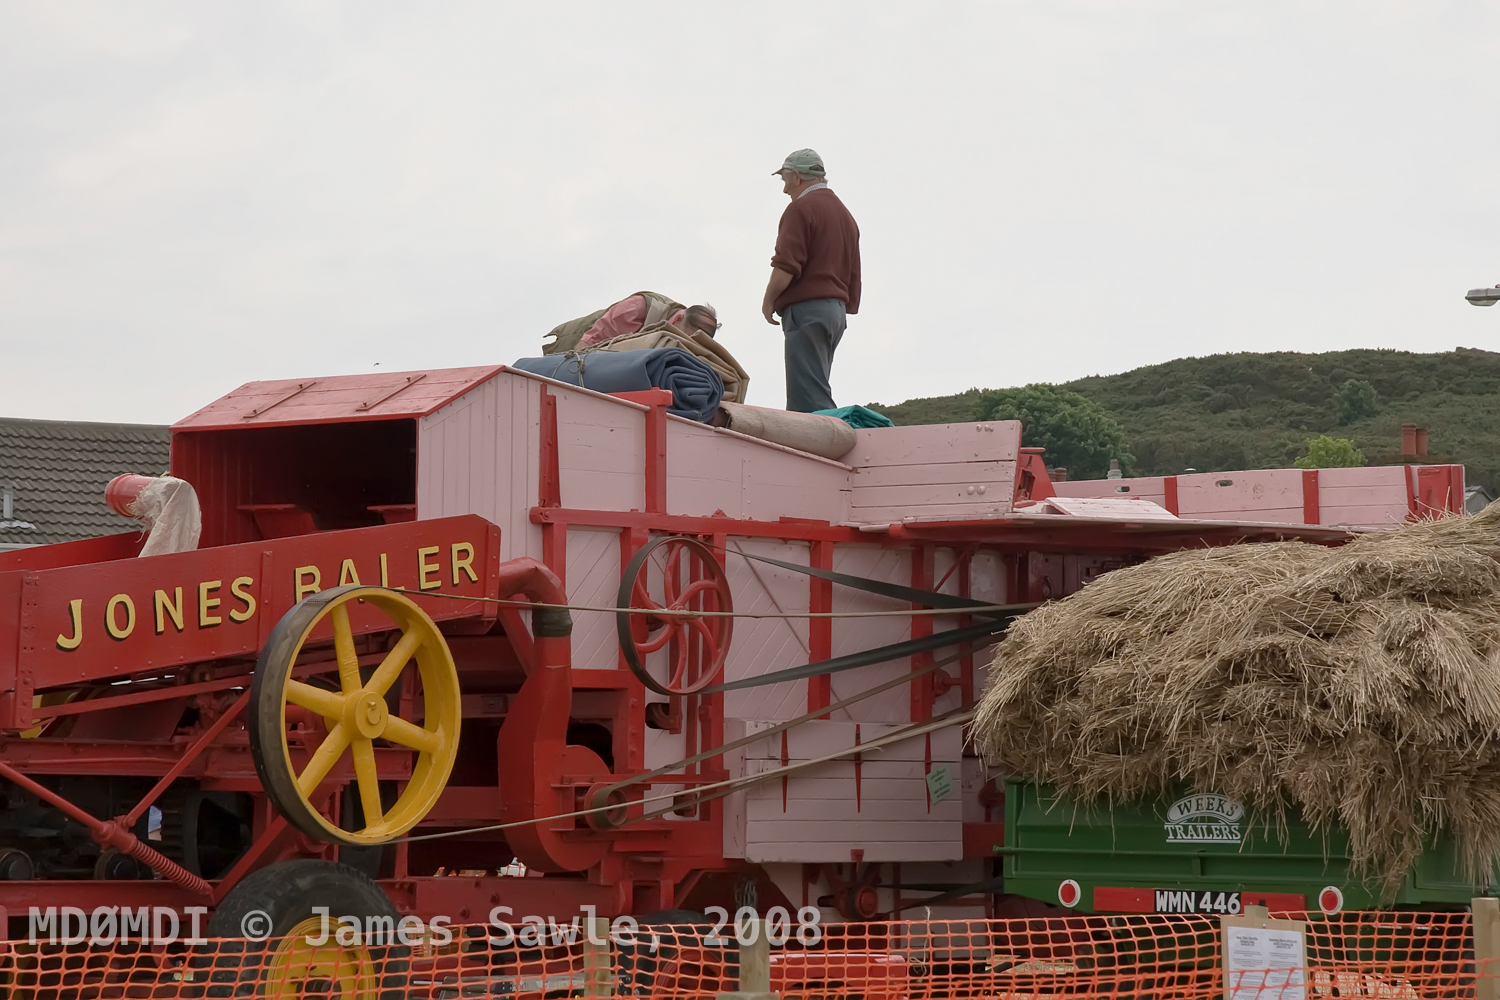 Vintage Jones Baler at the Mad Sunday Agricultural Show, Port St. Mary, Isle of Man